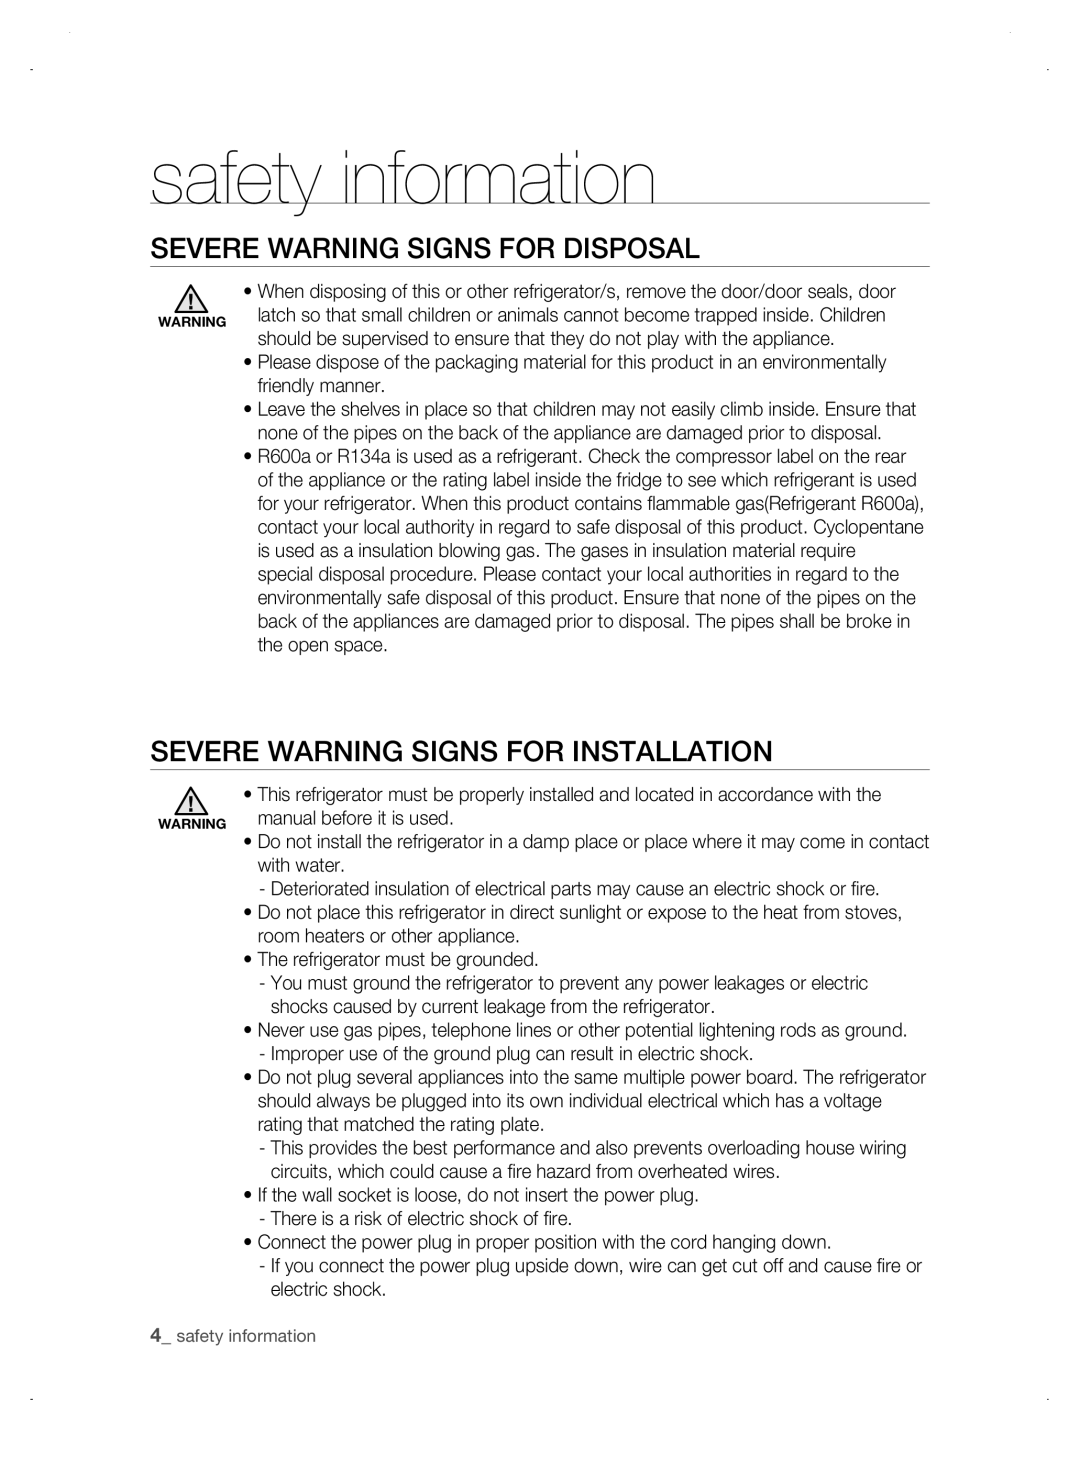 Samsung DA99-01906A SEVERE warning signs for DisPosaL, SEVERE WARNING SIGNS for INSTALLATION, manual before it is used 